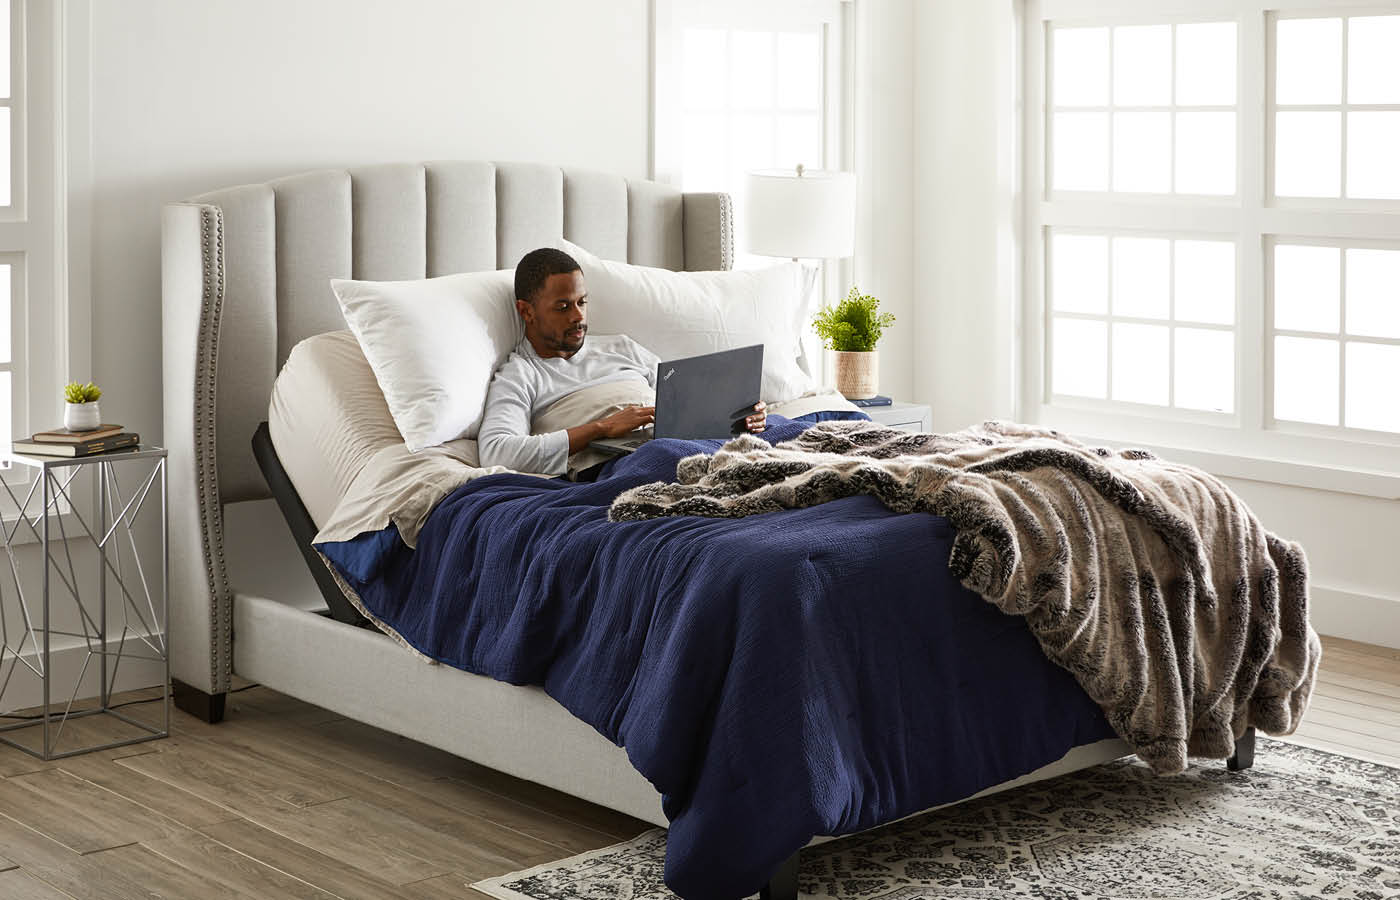 Why do people are getting an adjustable bed for their homes?